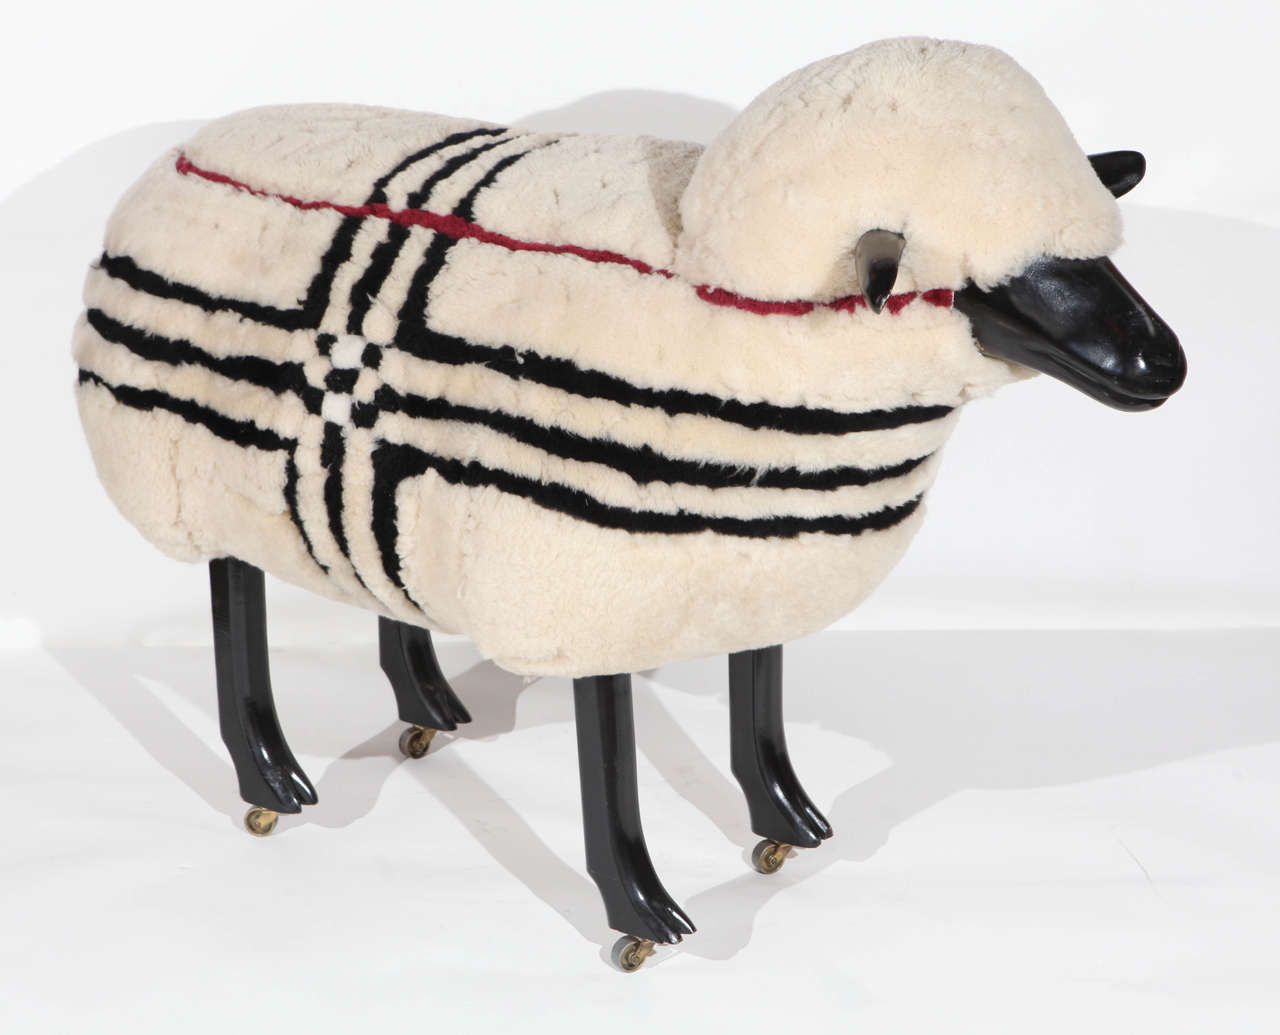 A unique Lalanne style sheep made for the Burberry store. Has the Burberry signature plaid stripes in black and burgundy. Has black lacquered wood ears, face and legs. Sculpture is set on four small casters.